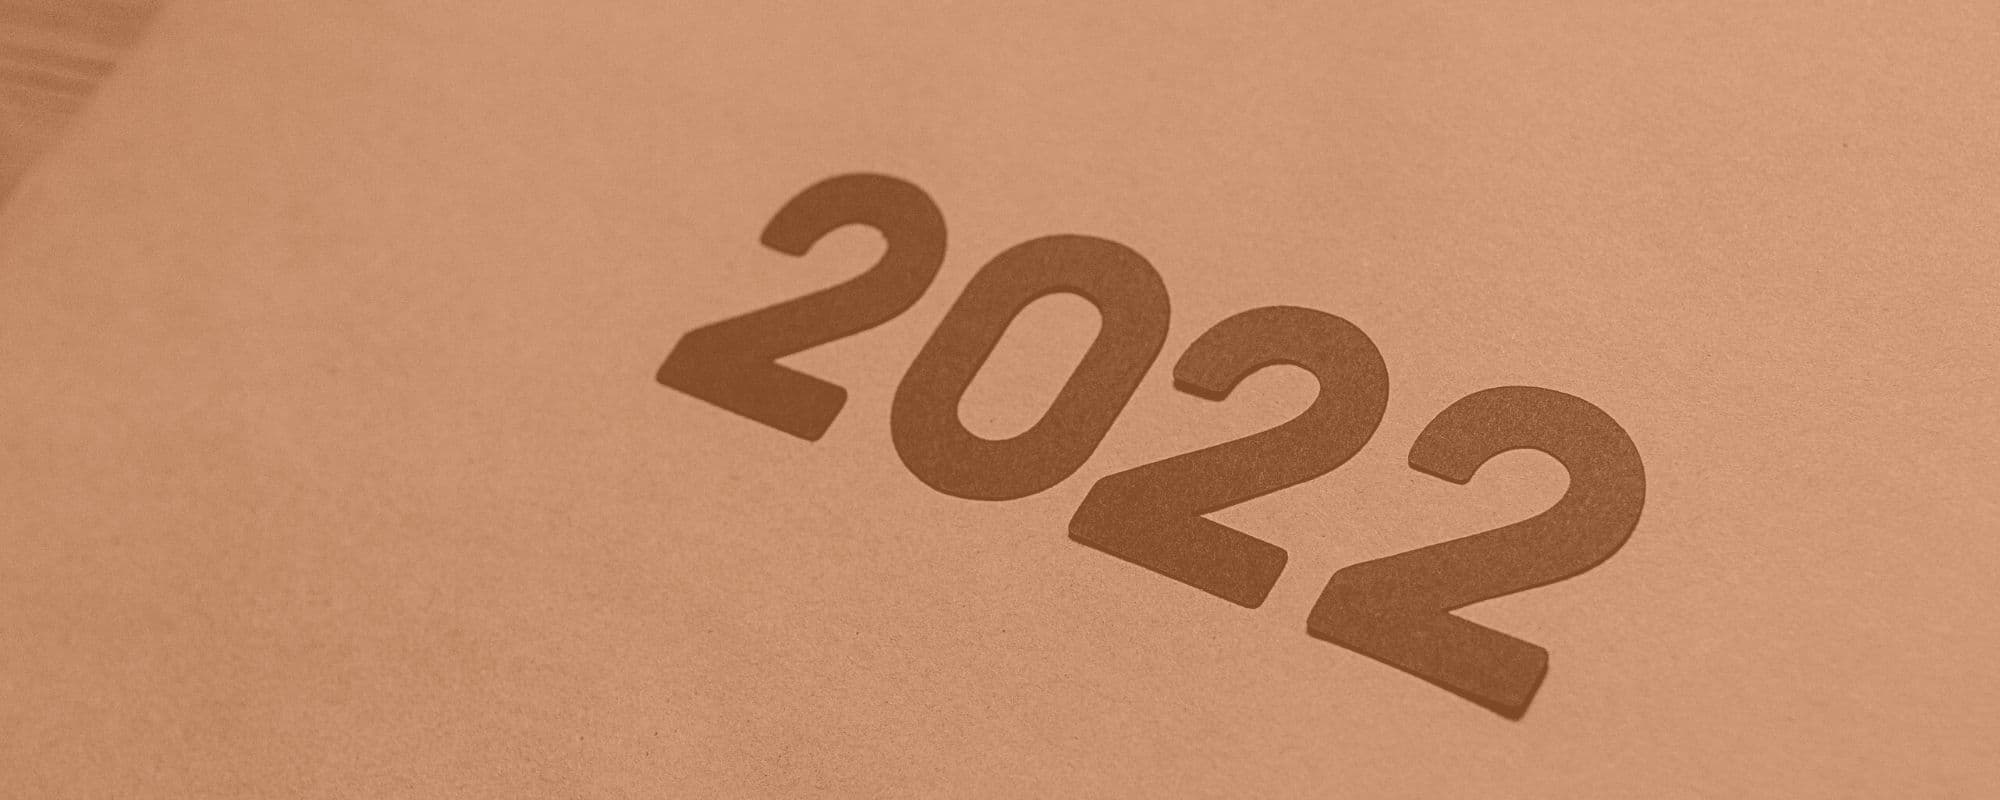 Planning Events In 2022: The Pandemic Is Over, But Don’t Plan Like It’s 2019